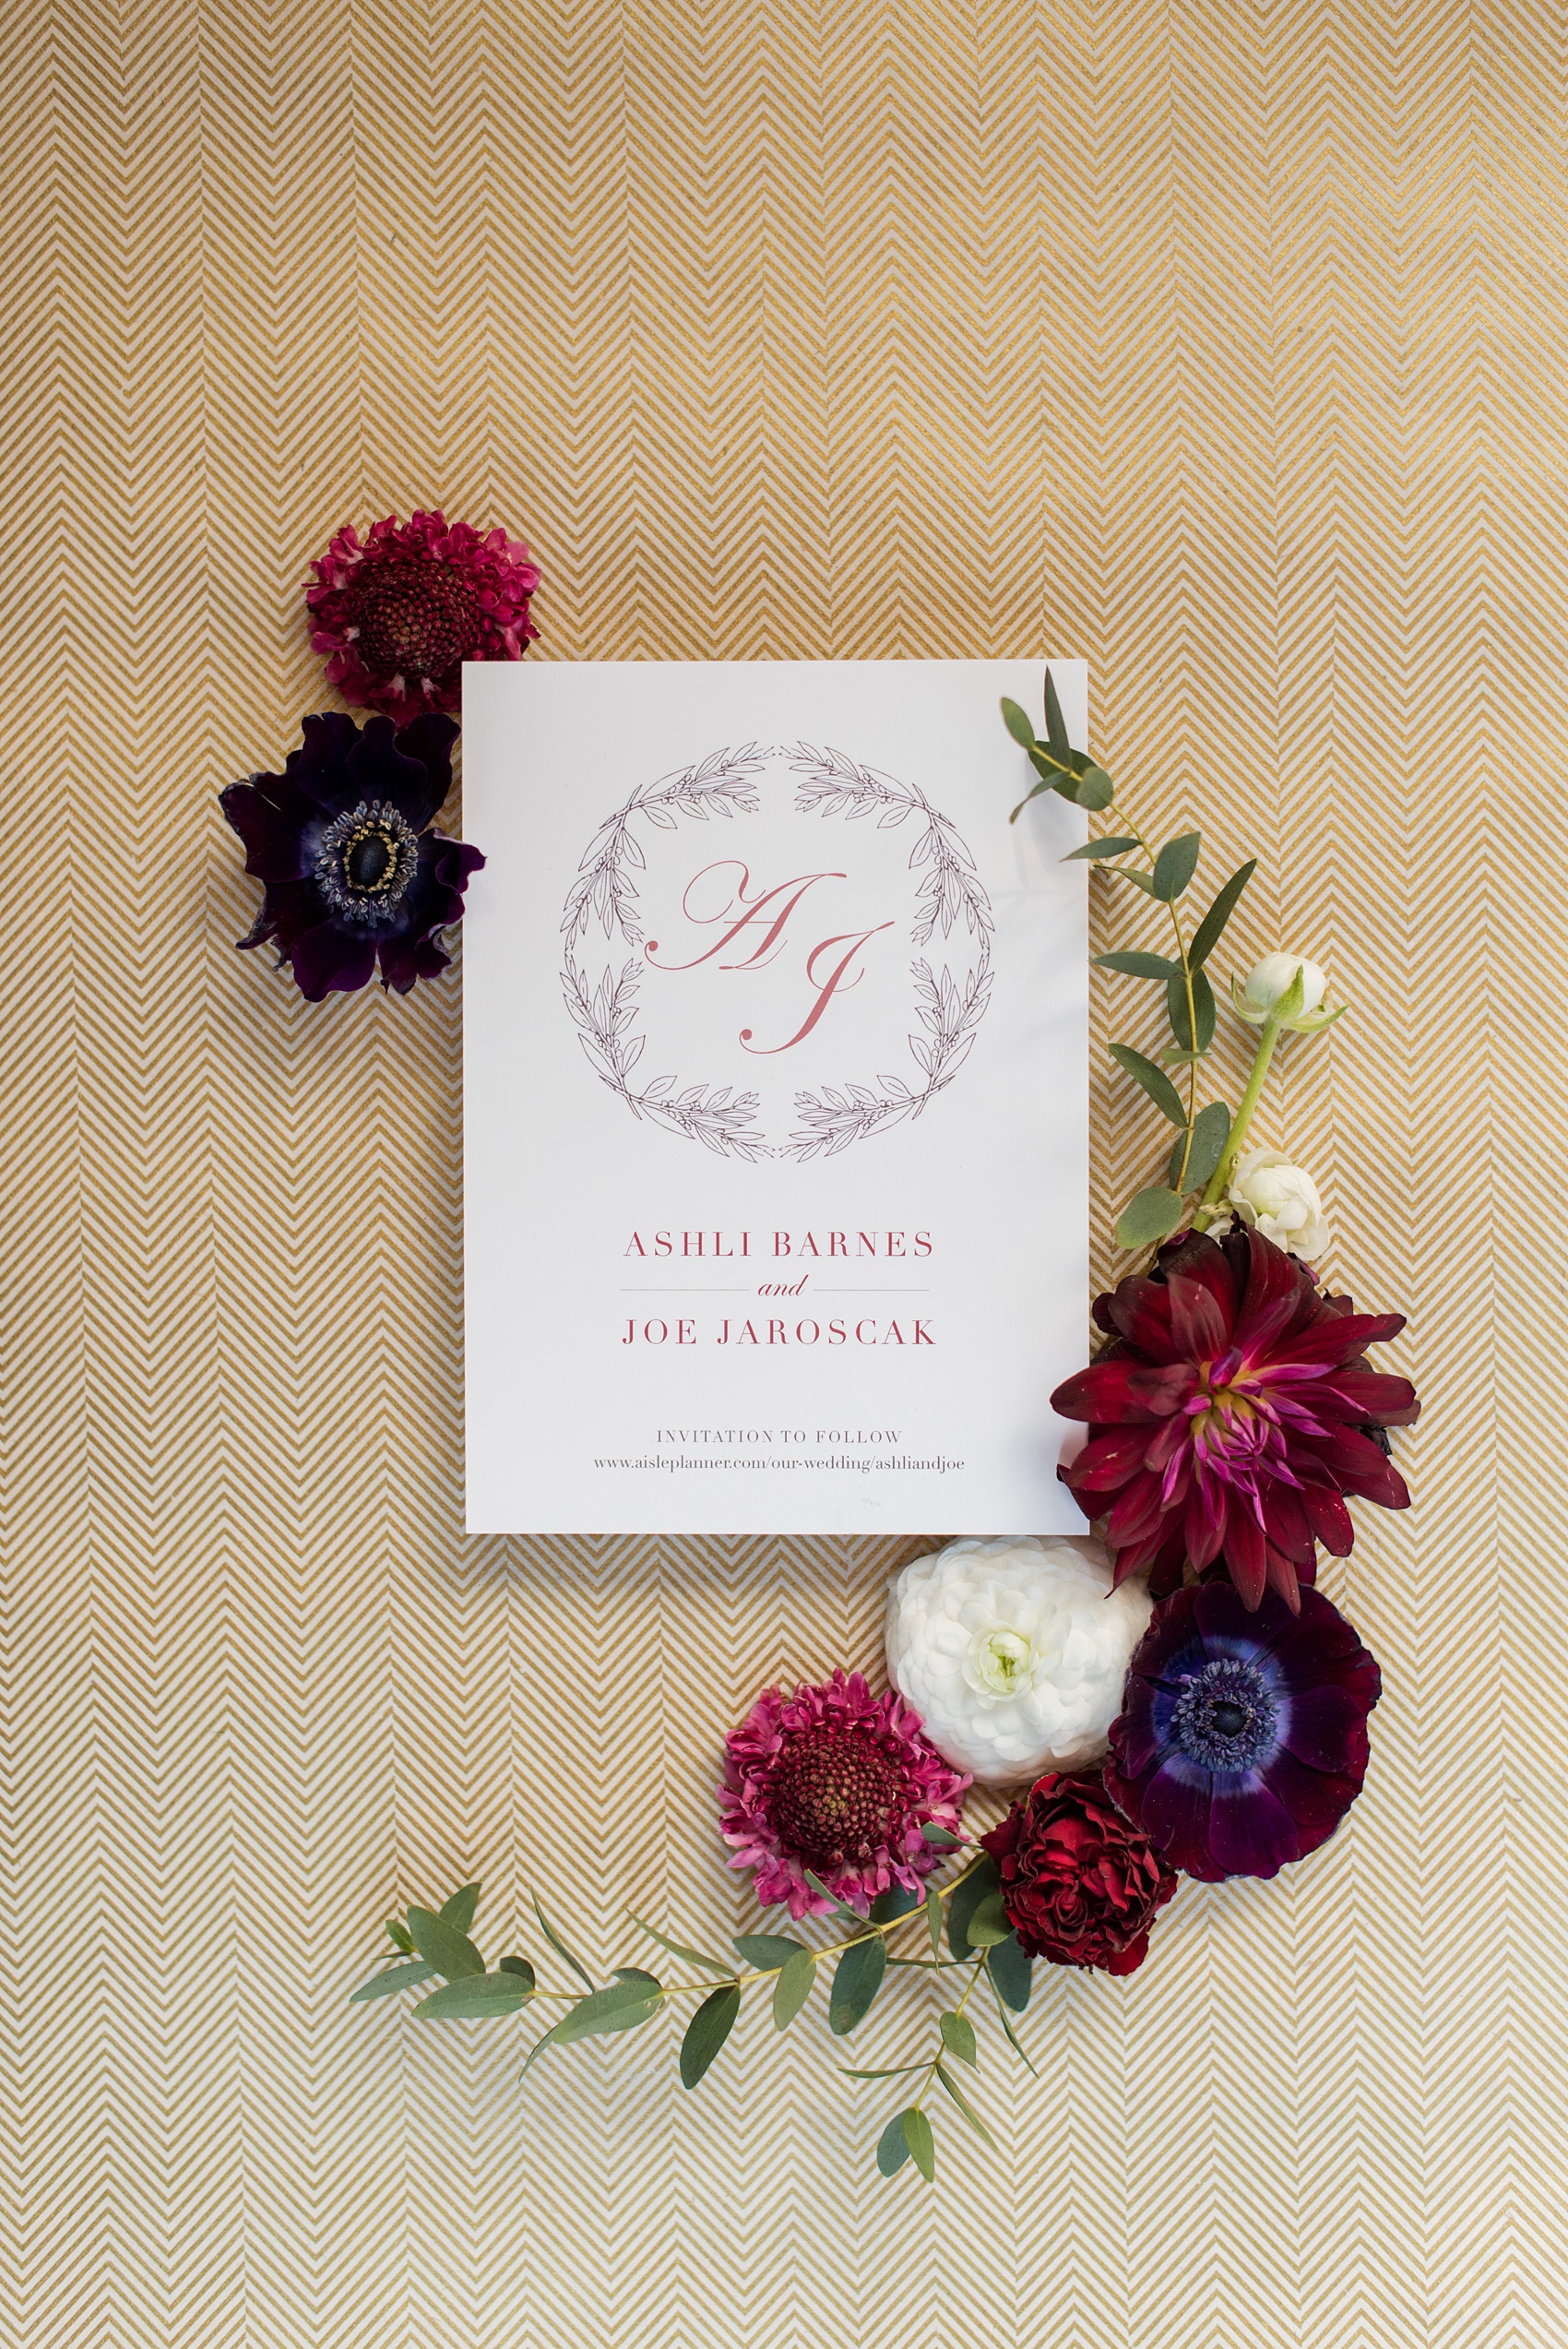 A fall wedding with burgundy, dusty rose and grey details. Mikkel Paige Photography, photographer in Greenville NC and Raleigh, captured this wedding at Rock Springs Center, planned by @vivalevent. The letterpress invitation was just the start of a beautiful day! Click through for details! #mikkelpaige NCwedding #northcarolinawedding #southernwedding #letterpress #weddinginvitation #stationery